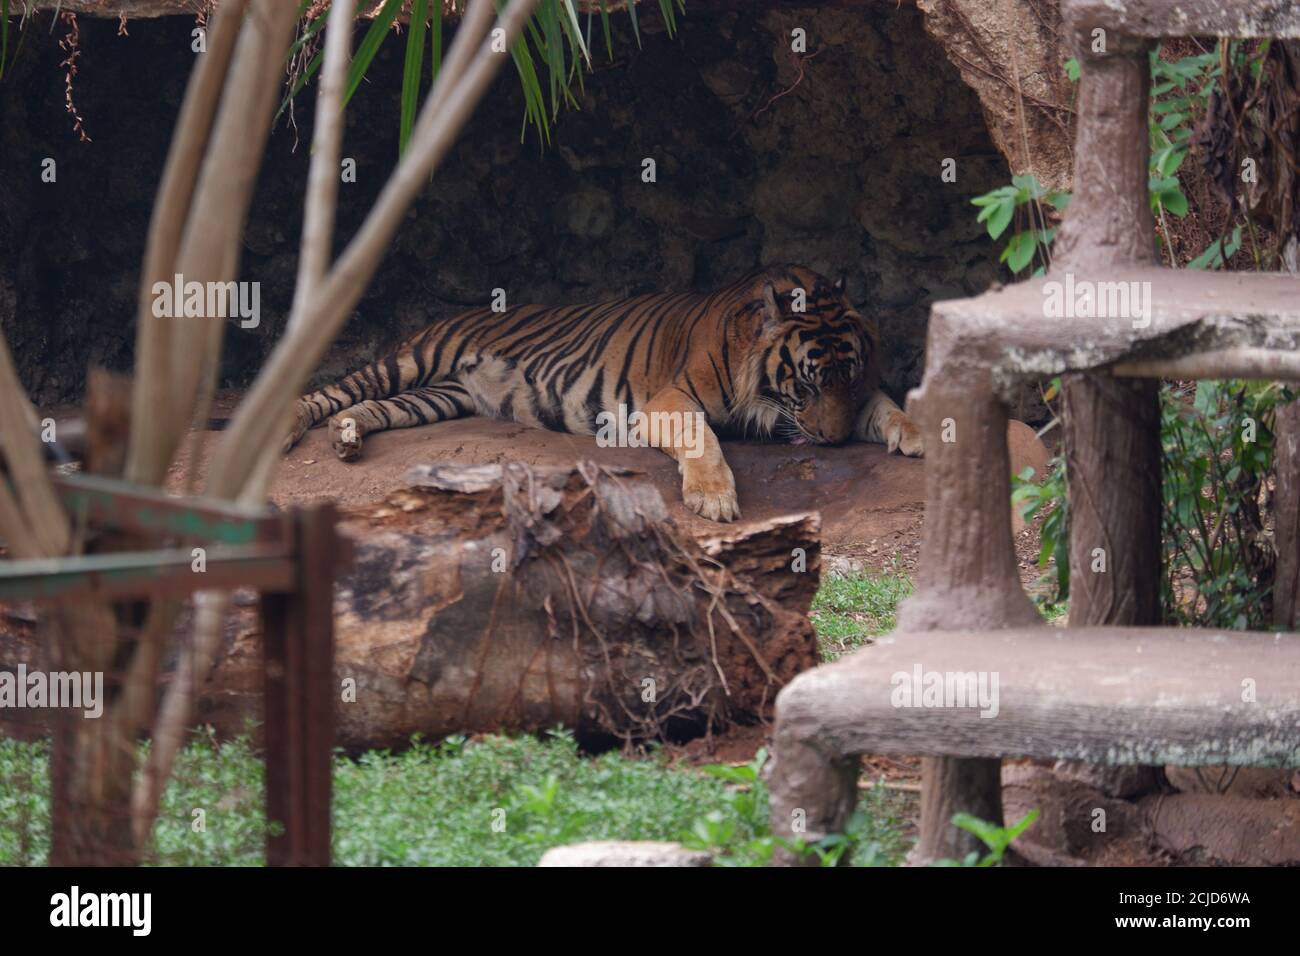 The Sumatran tiger is a population of Panthera tigris sondaica in the Indonesian island of Sumatra. This population was listed as Critically Endangere Stock Photo